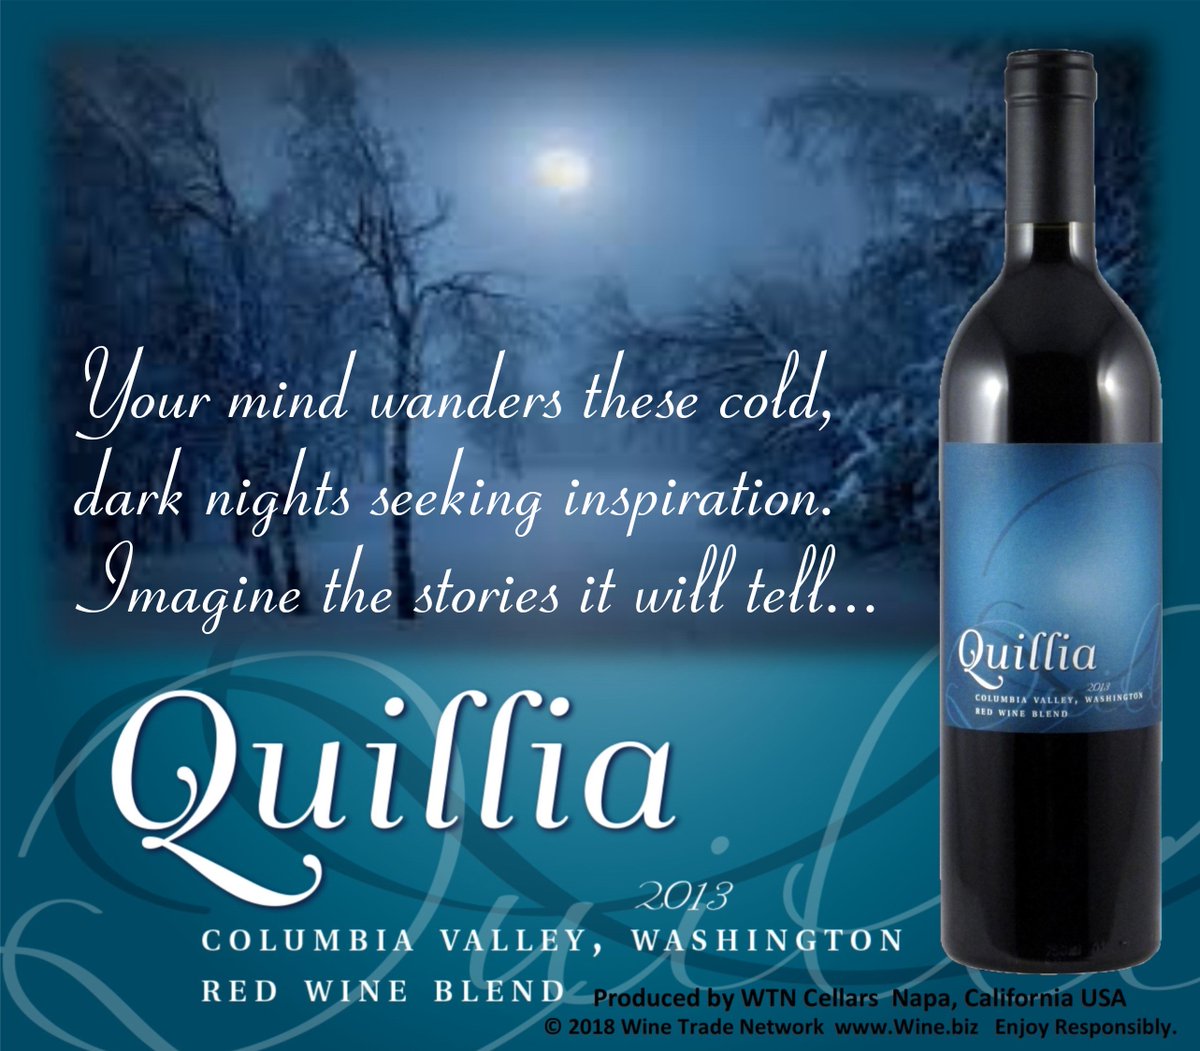 Your mind wanders these cold, dark nights seeking inspiration. Imagine the stories it will tell... Quillia Premium Red Wine Blend from Washington's Columbia Valley - order: ow.ly/yO4C30hCVpF #Quillia #Wine #ColumbiaValley #WashingtonStateWine